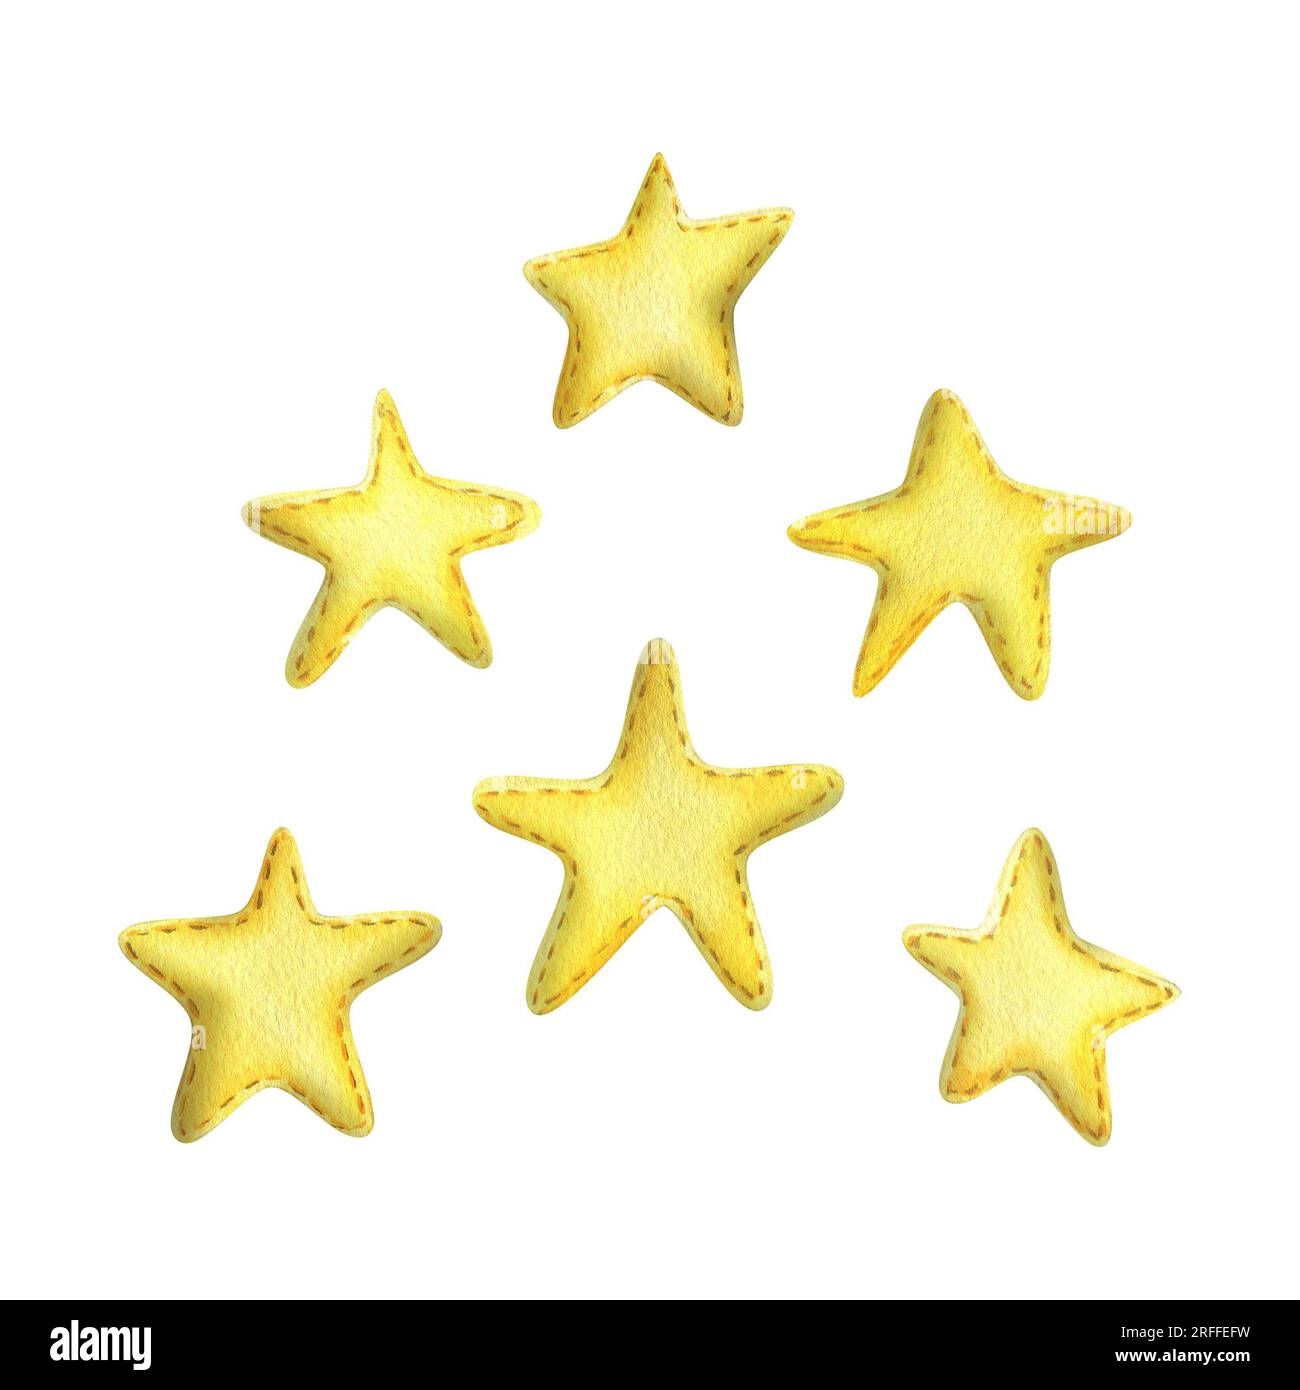 Yellow stars sewn from fabric with thread stitches. Watercolor illustration, hand drawn. Set of isolated objects on a white background. Stock Photo